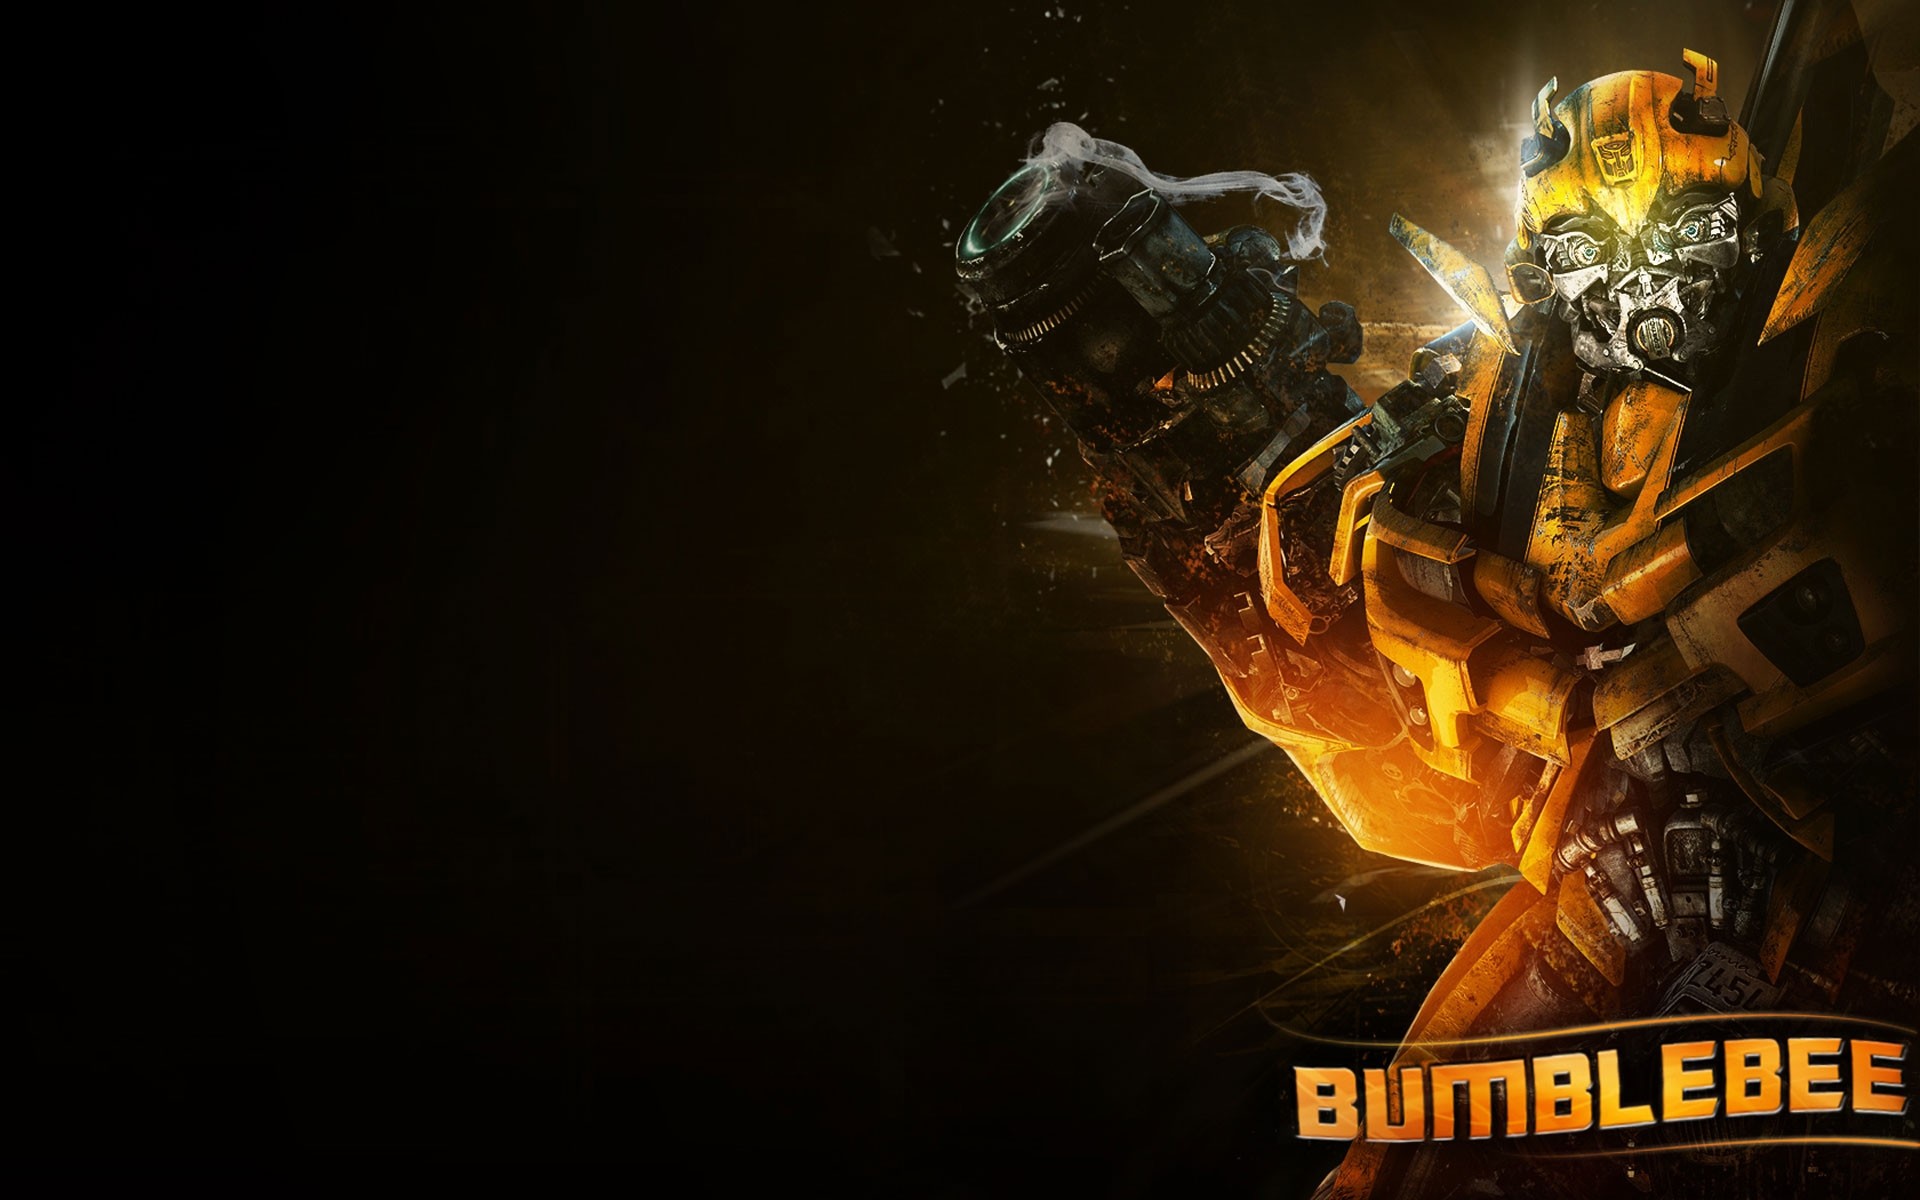 bumblebee wallpaper hd,action adventure game,fictional character,pc game,games,movie